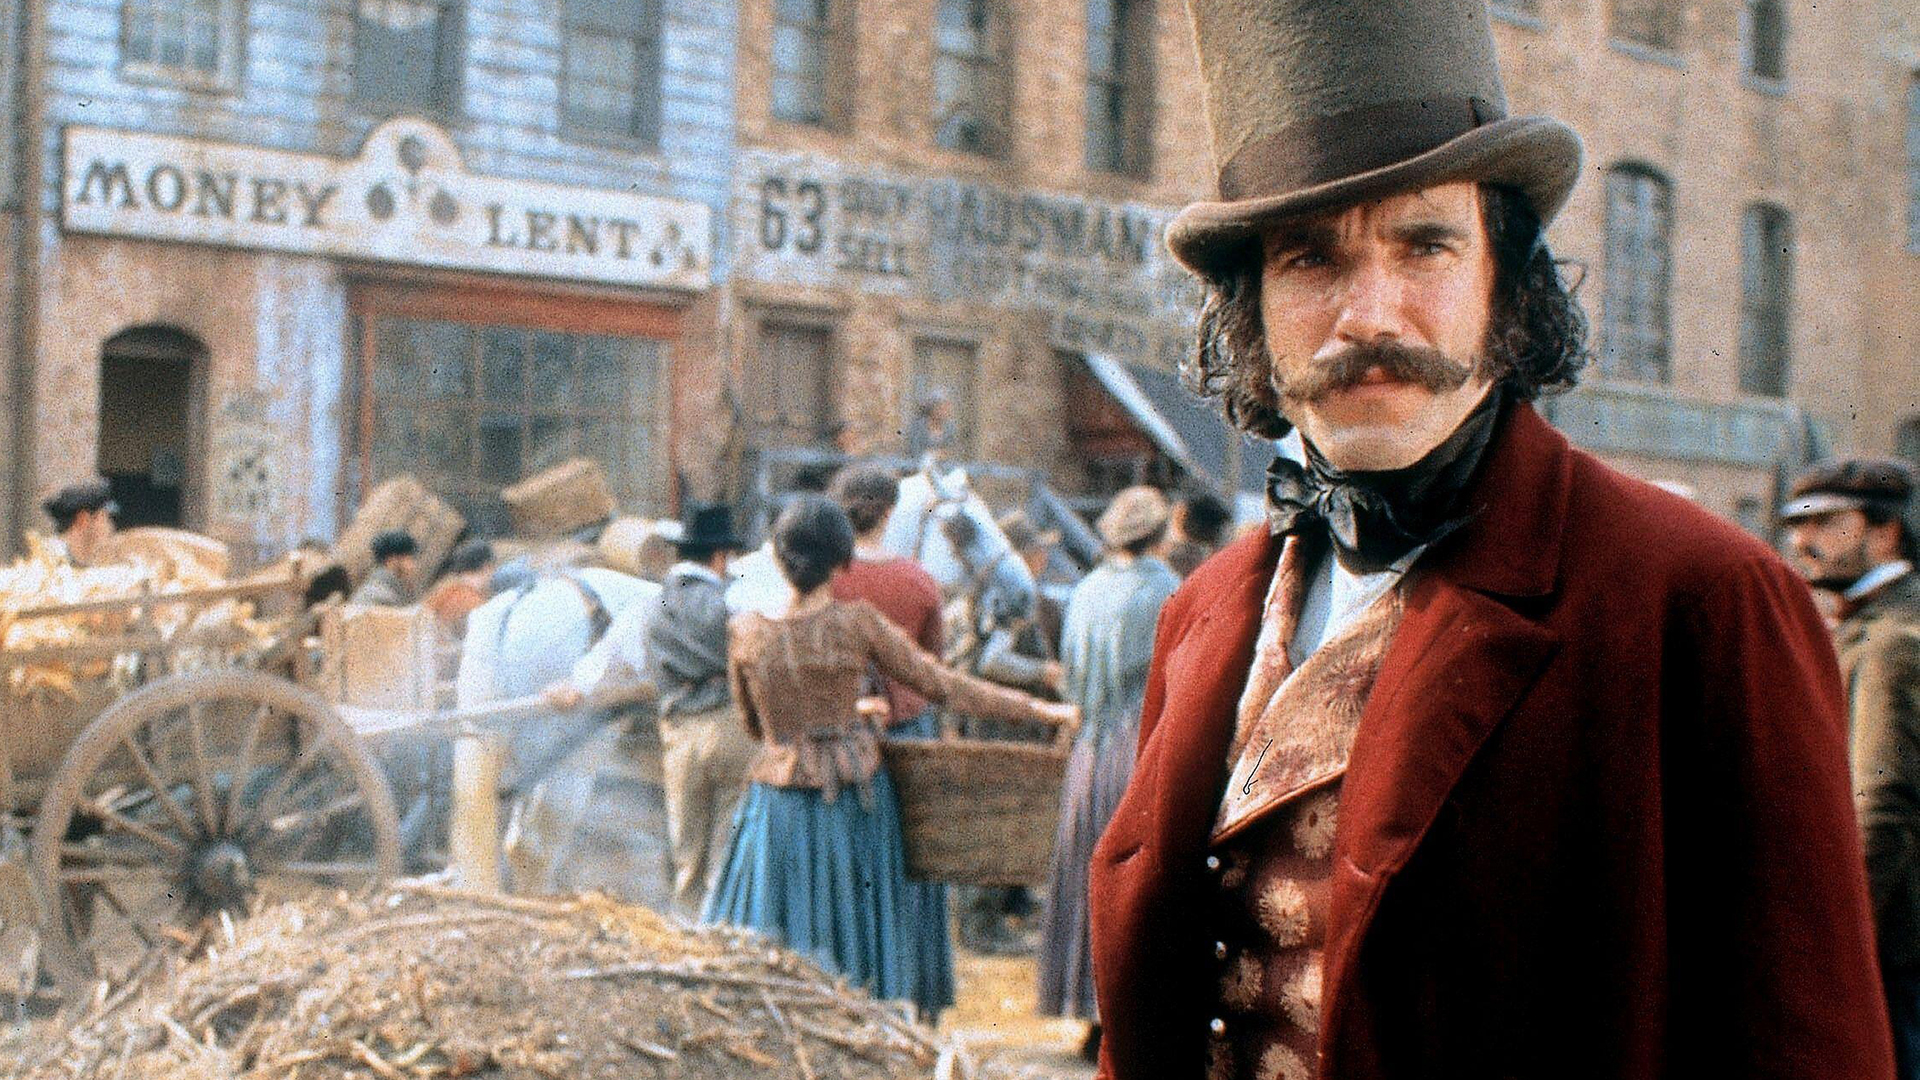 Daniel Day-Lewis in top hat and moustache